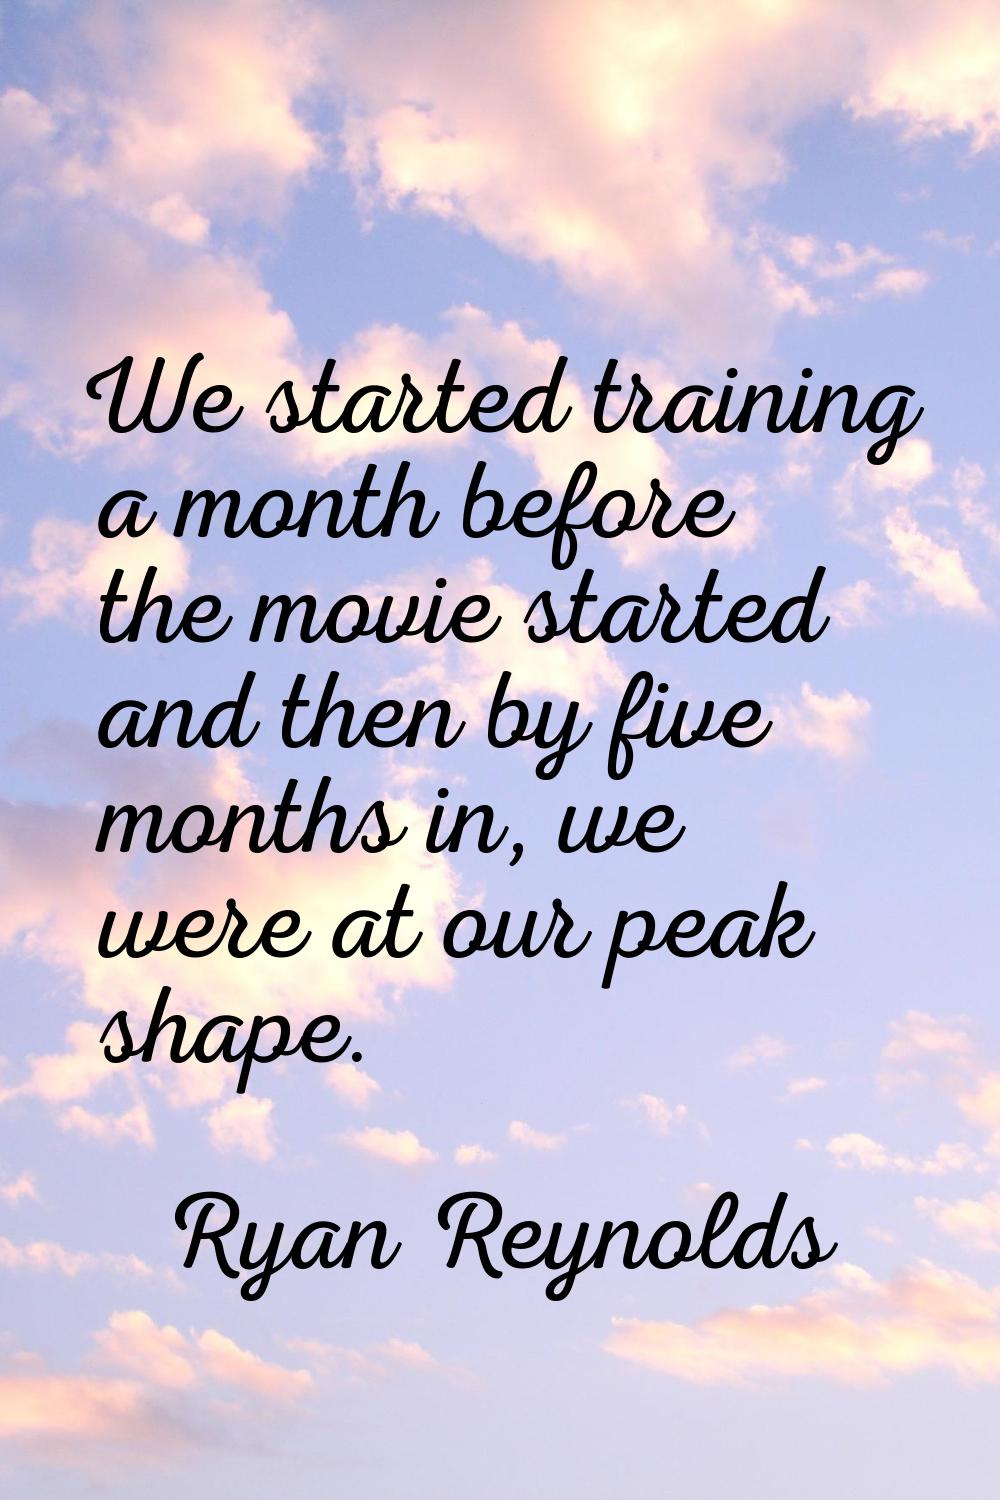 We started training a month before the movie started and then by five months in, we were at our pea